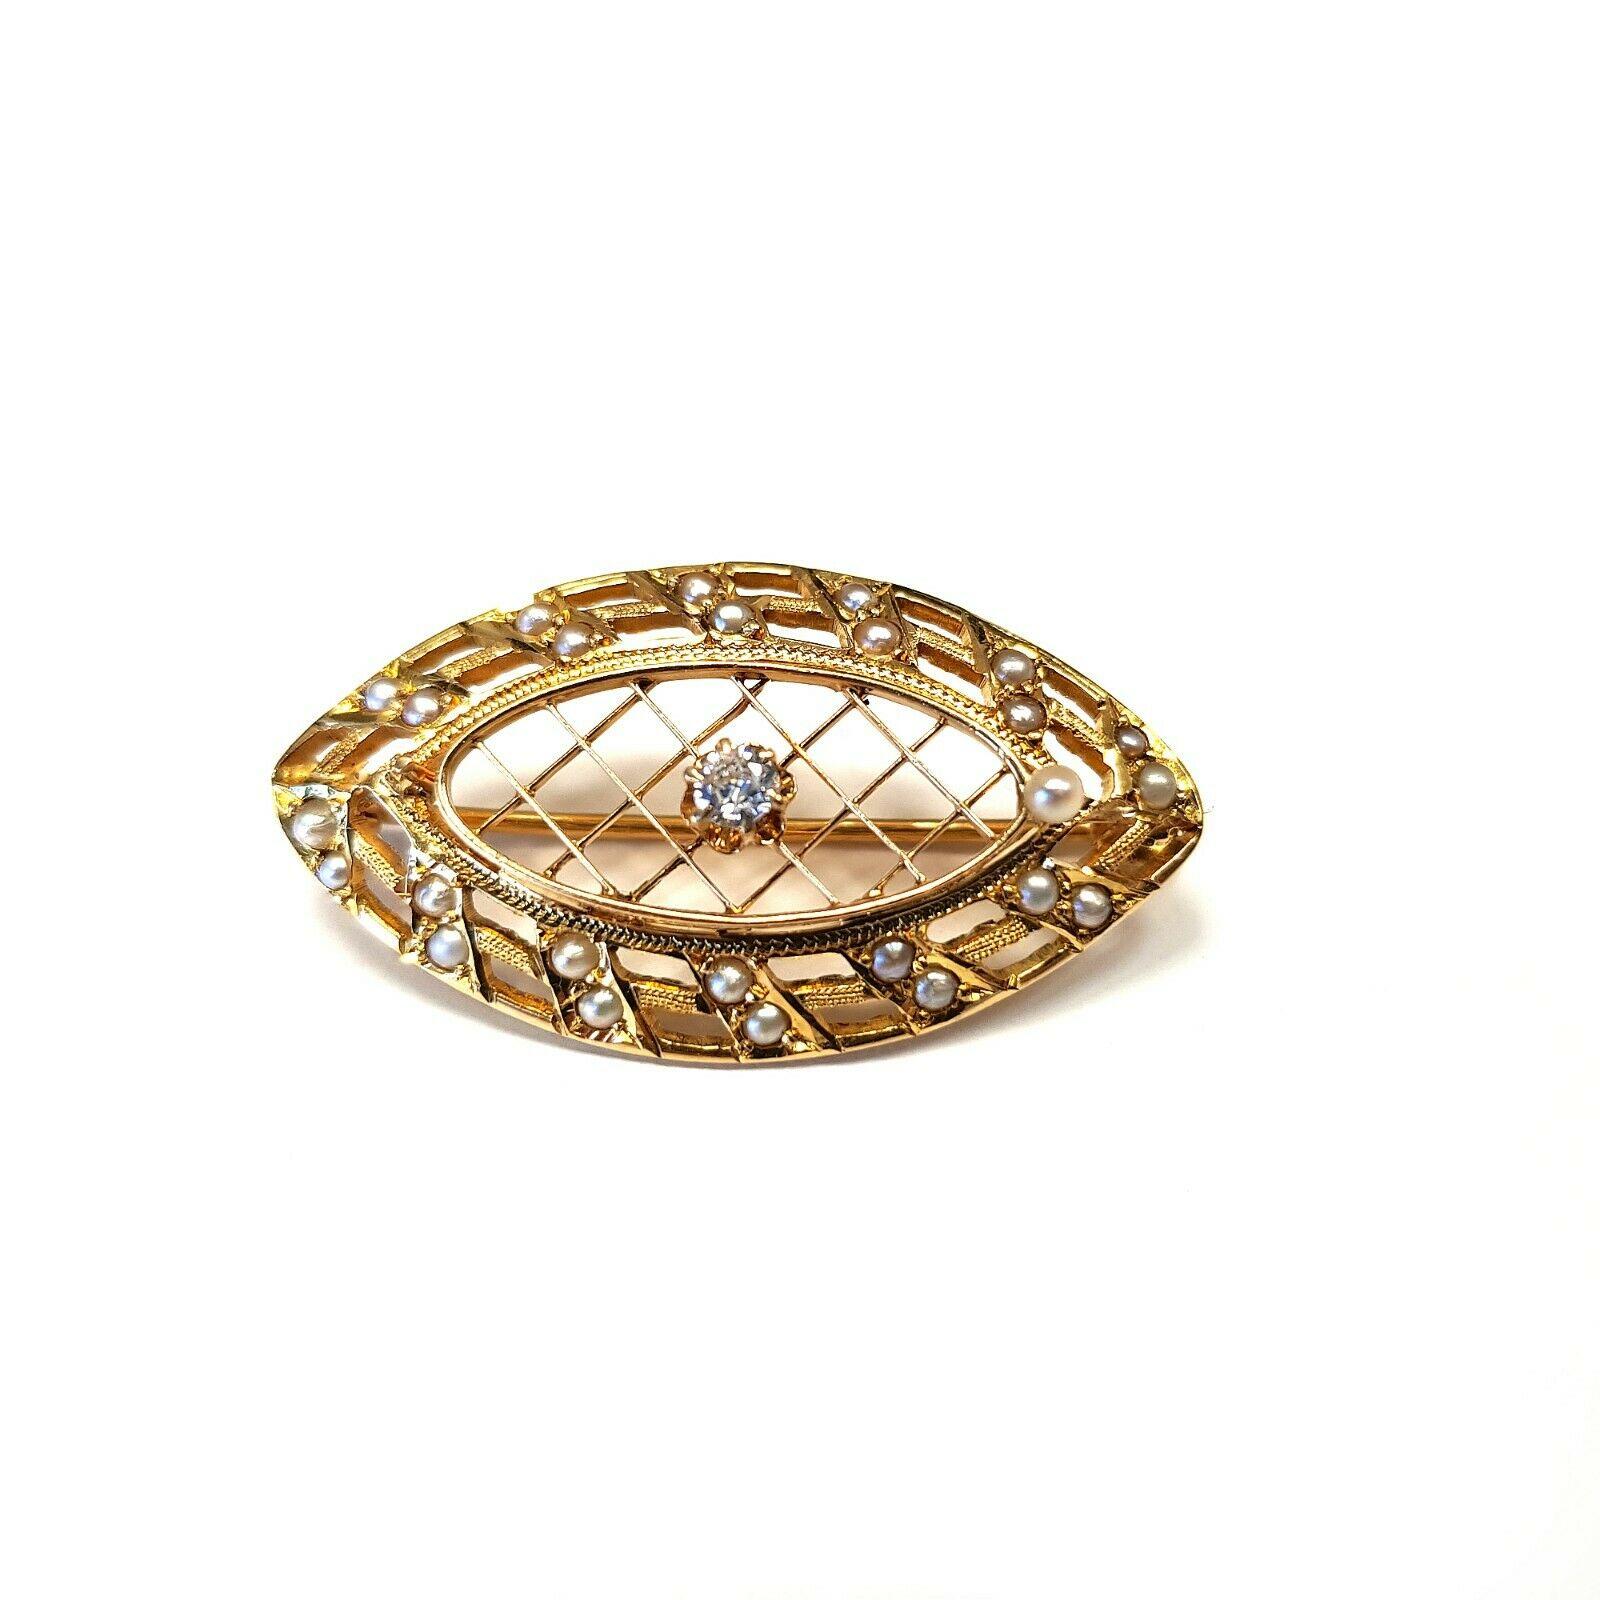 Round Cut Vintage 14 Karat Gold Shield Brooch with Very Tiny Pearls and Diamond 0.08 Carat For Sale